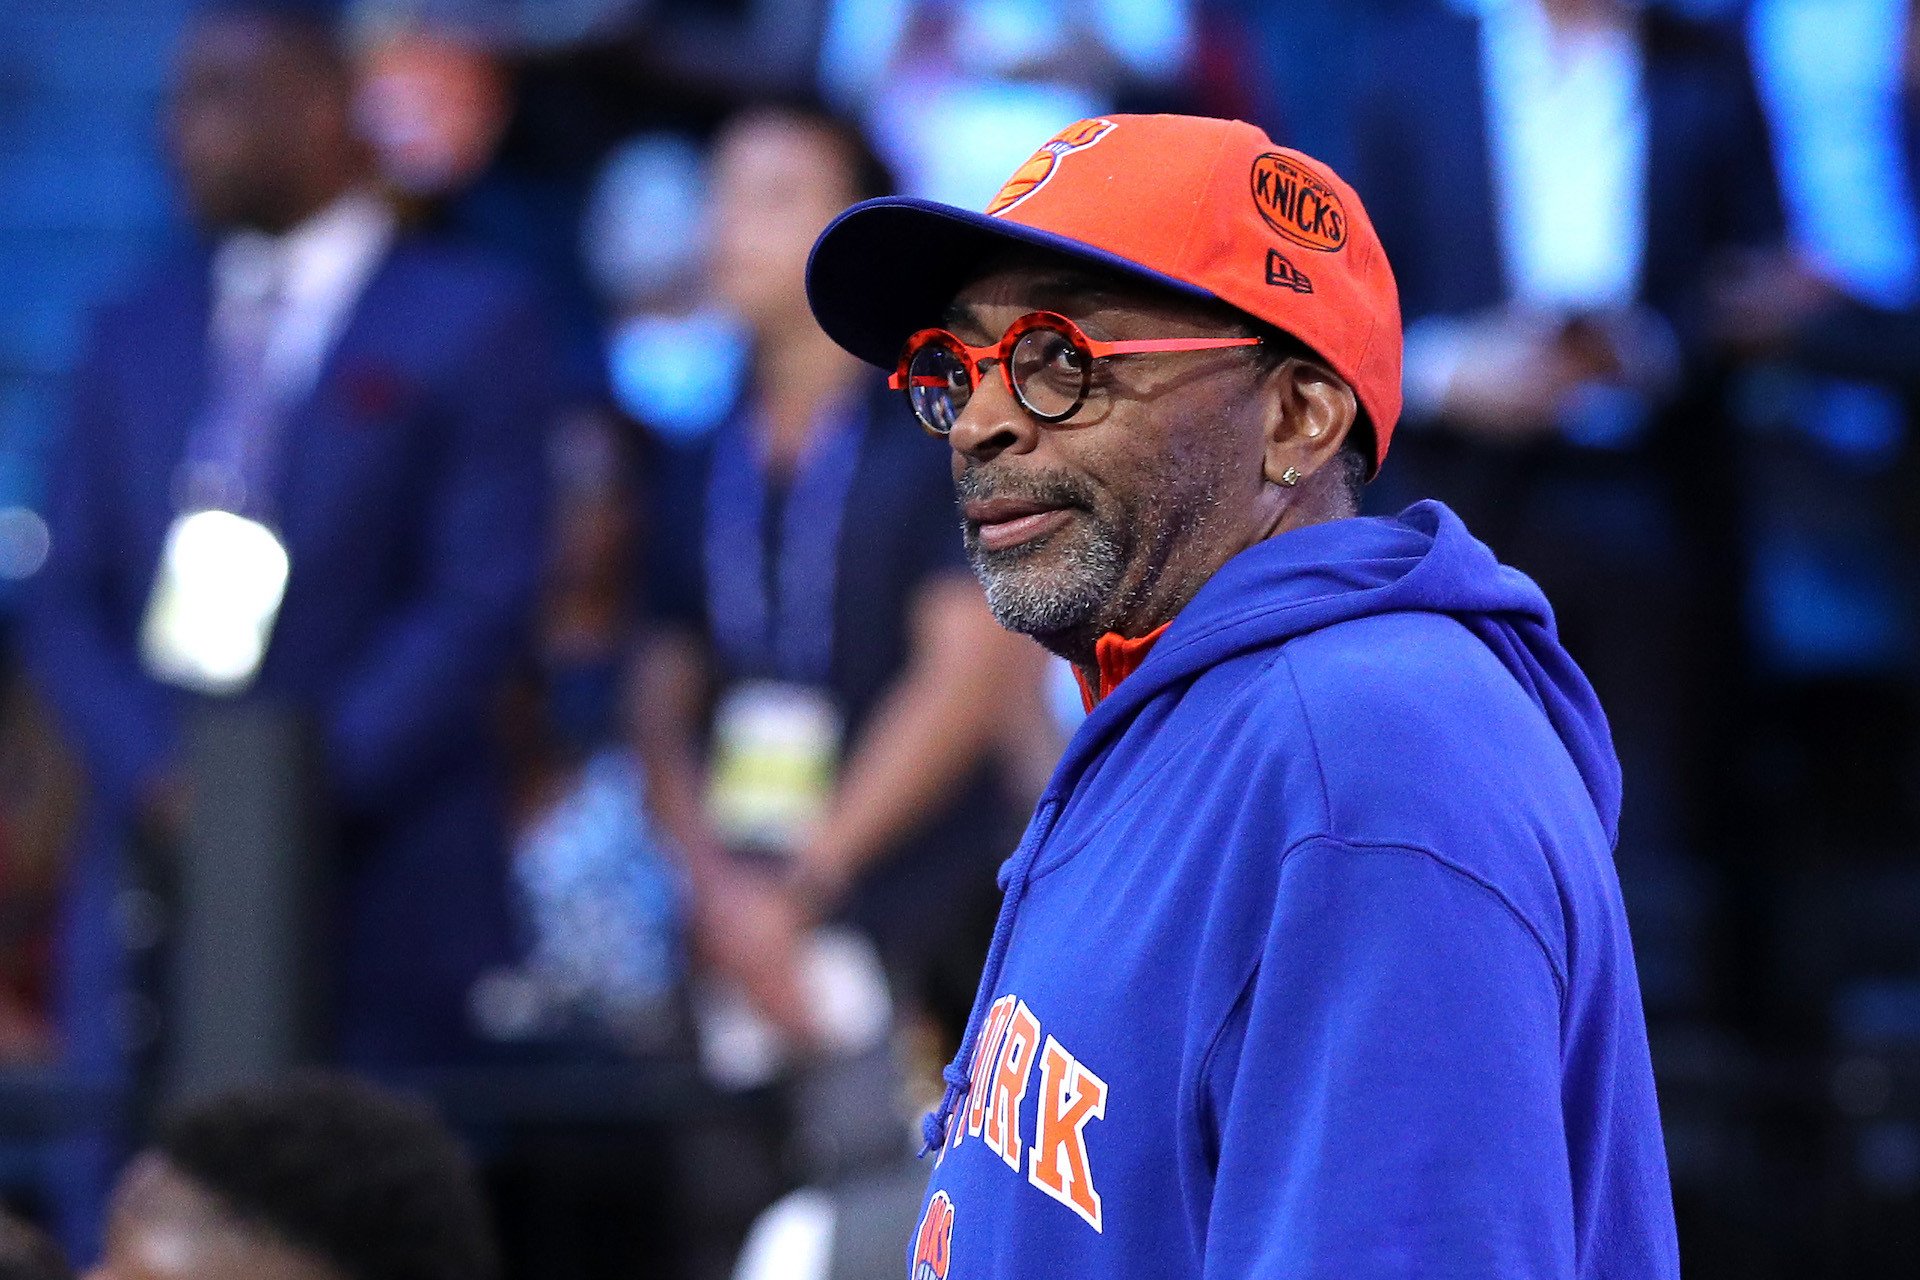 Spike Lee explains the incident at Madison Square Garden